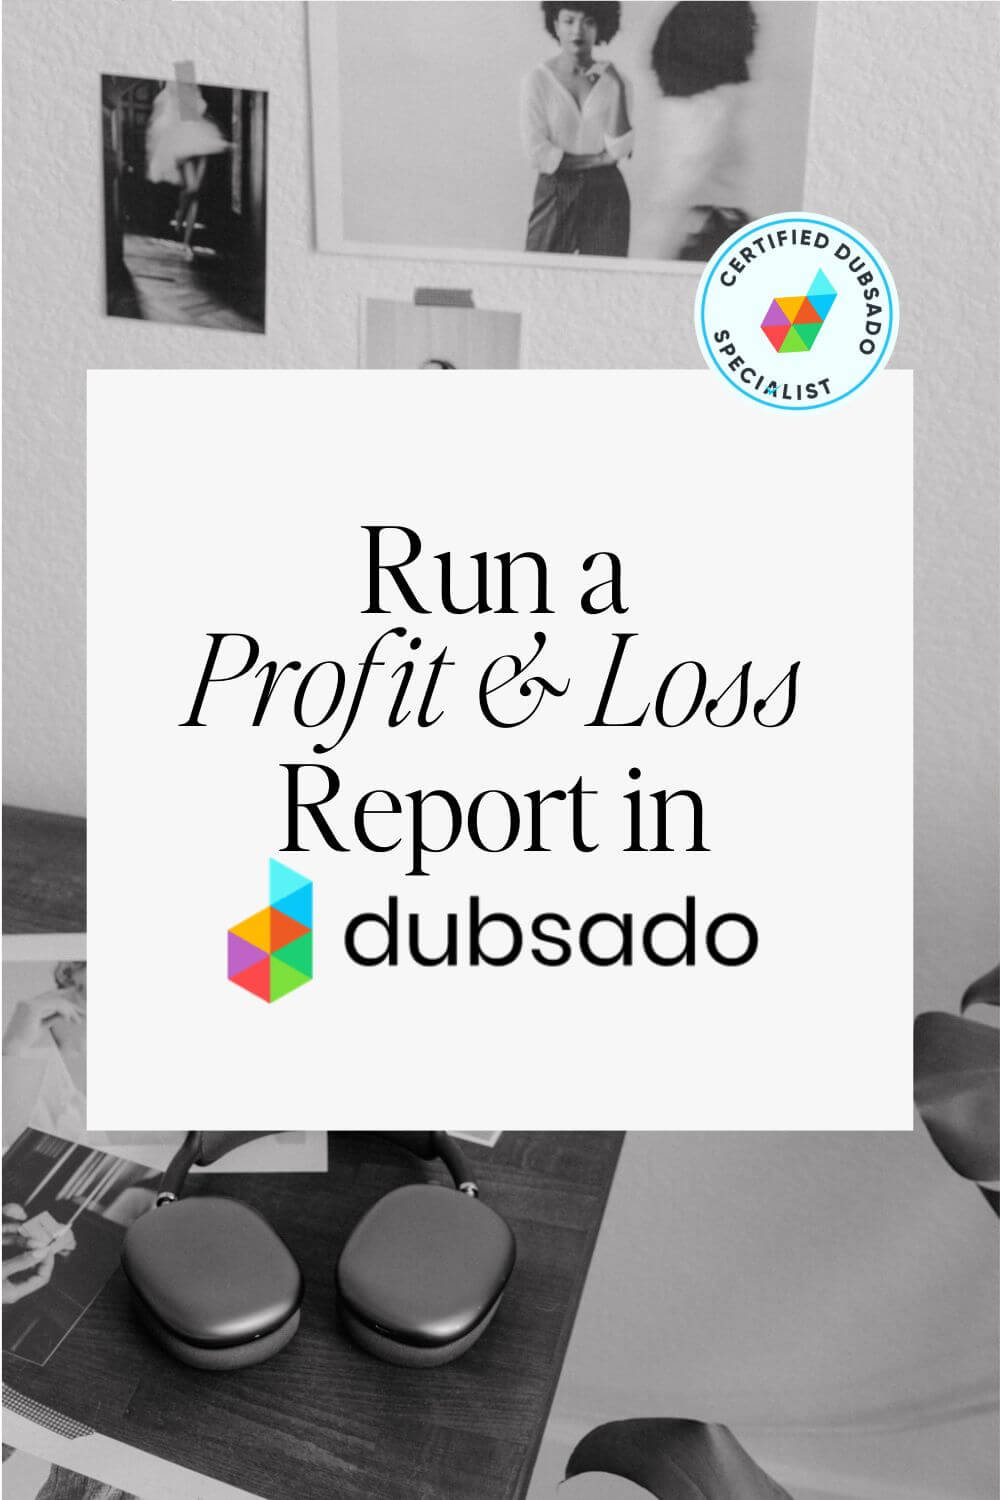 A black and white photo of a desk with papers, headphones, and a "Certified Dubsado Specialist" badge. The text overlay says "Run a Profit & Loss Report in Dubsado."